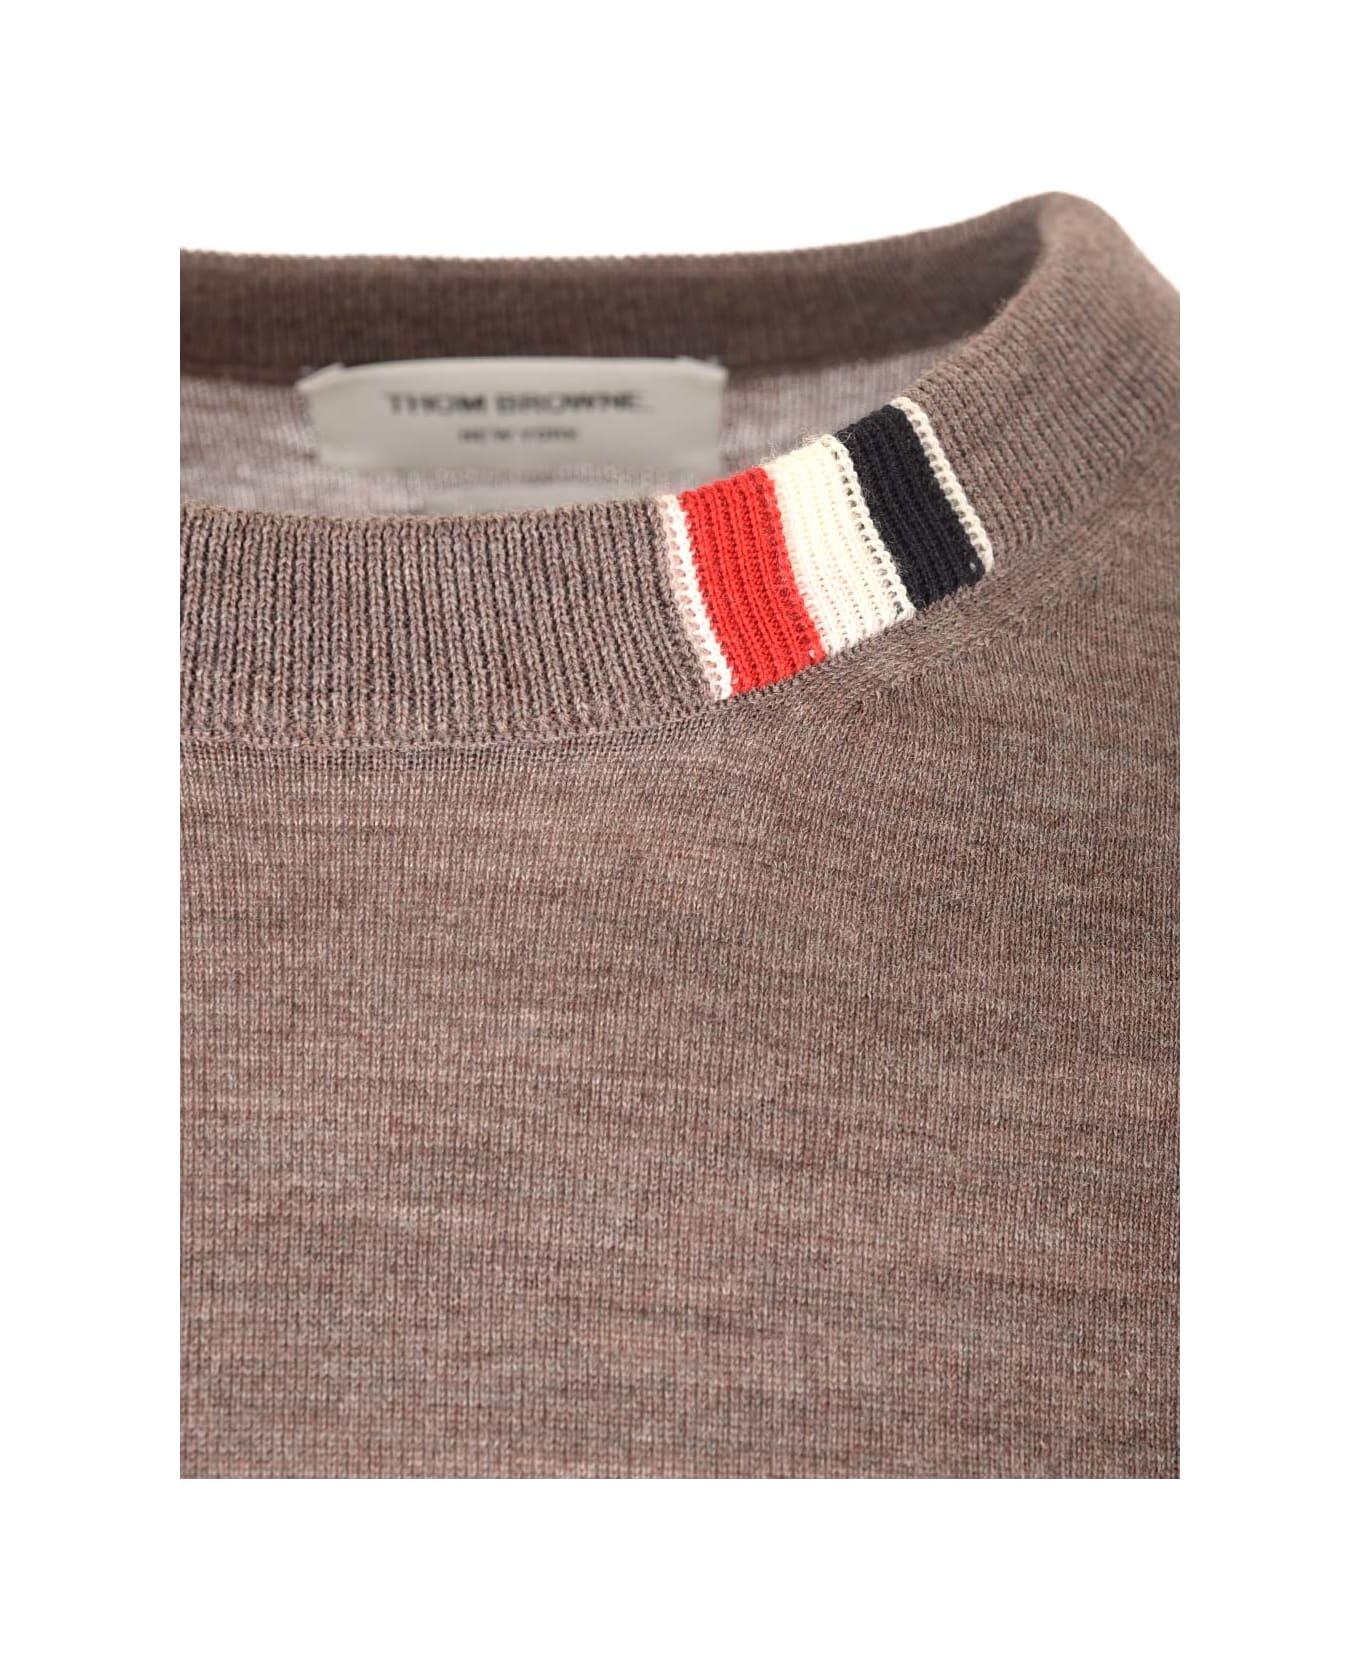 Thom Browne Relaxed-fit Crew Neck Pullover - brown ニットウェア